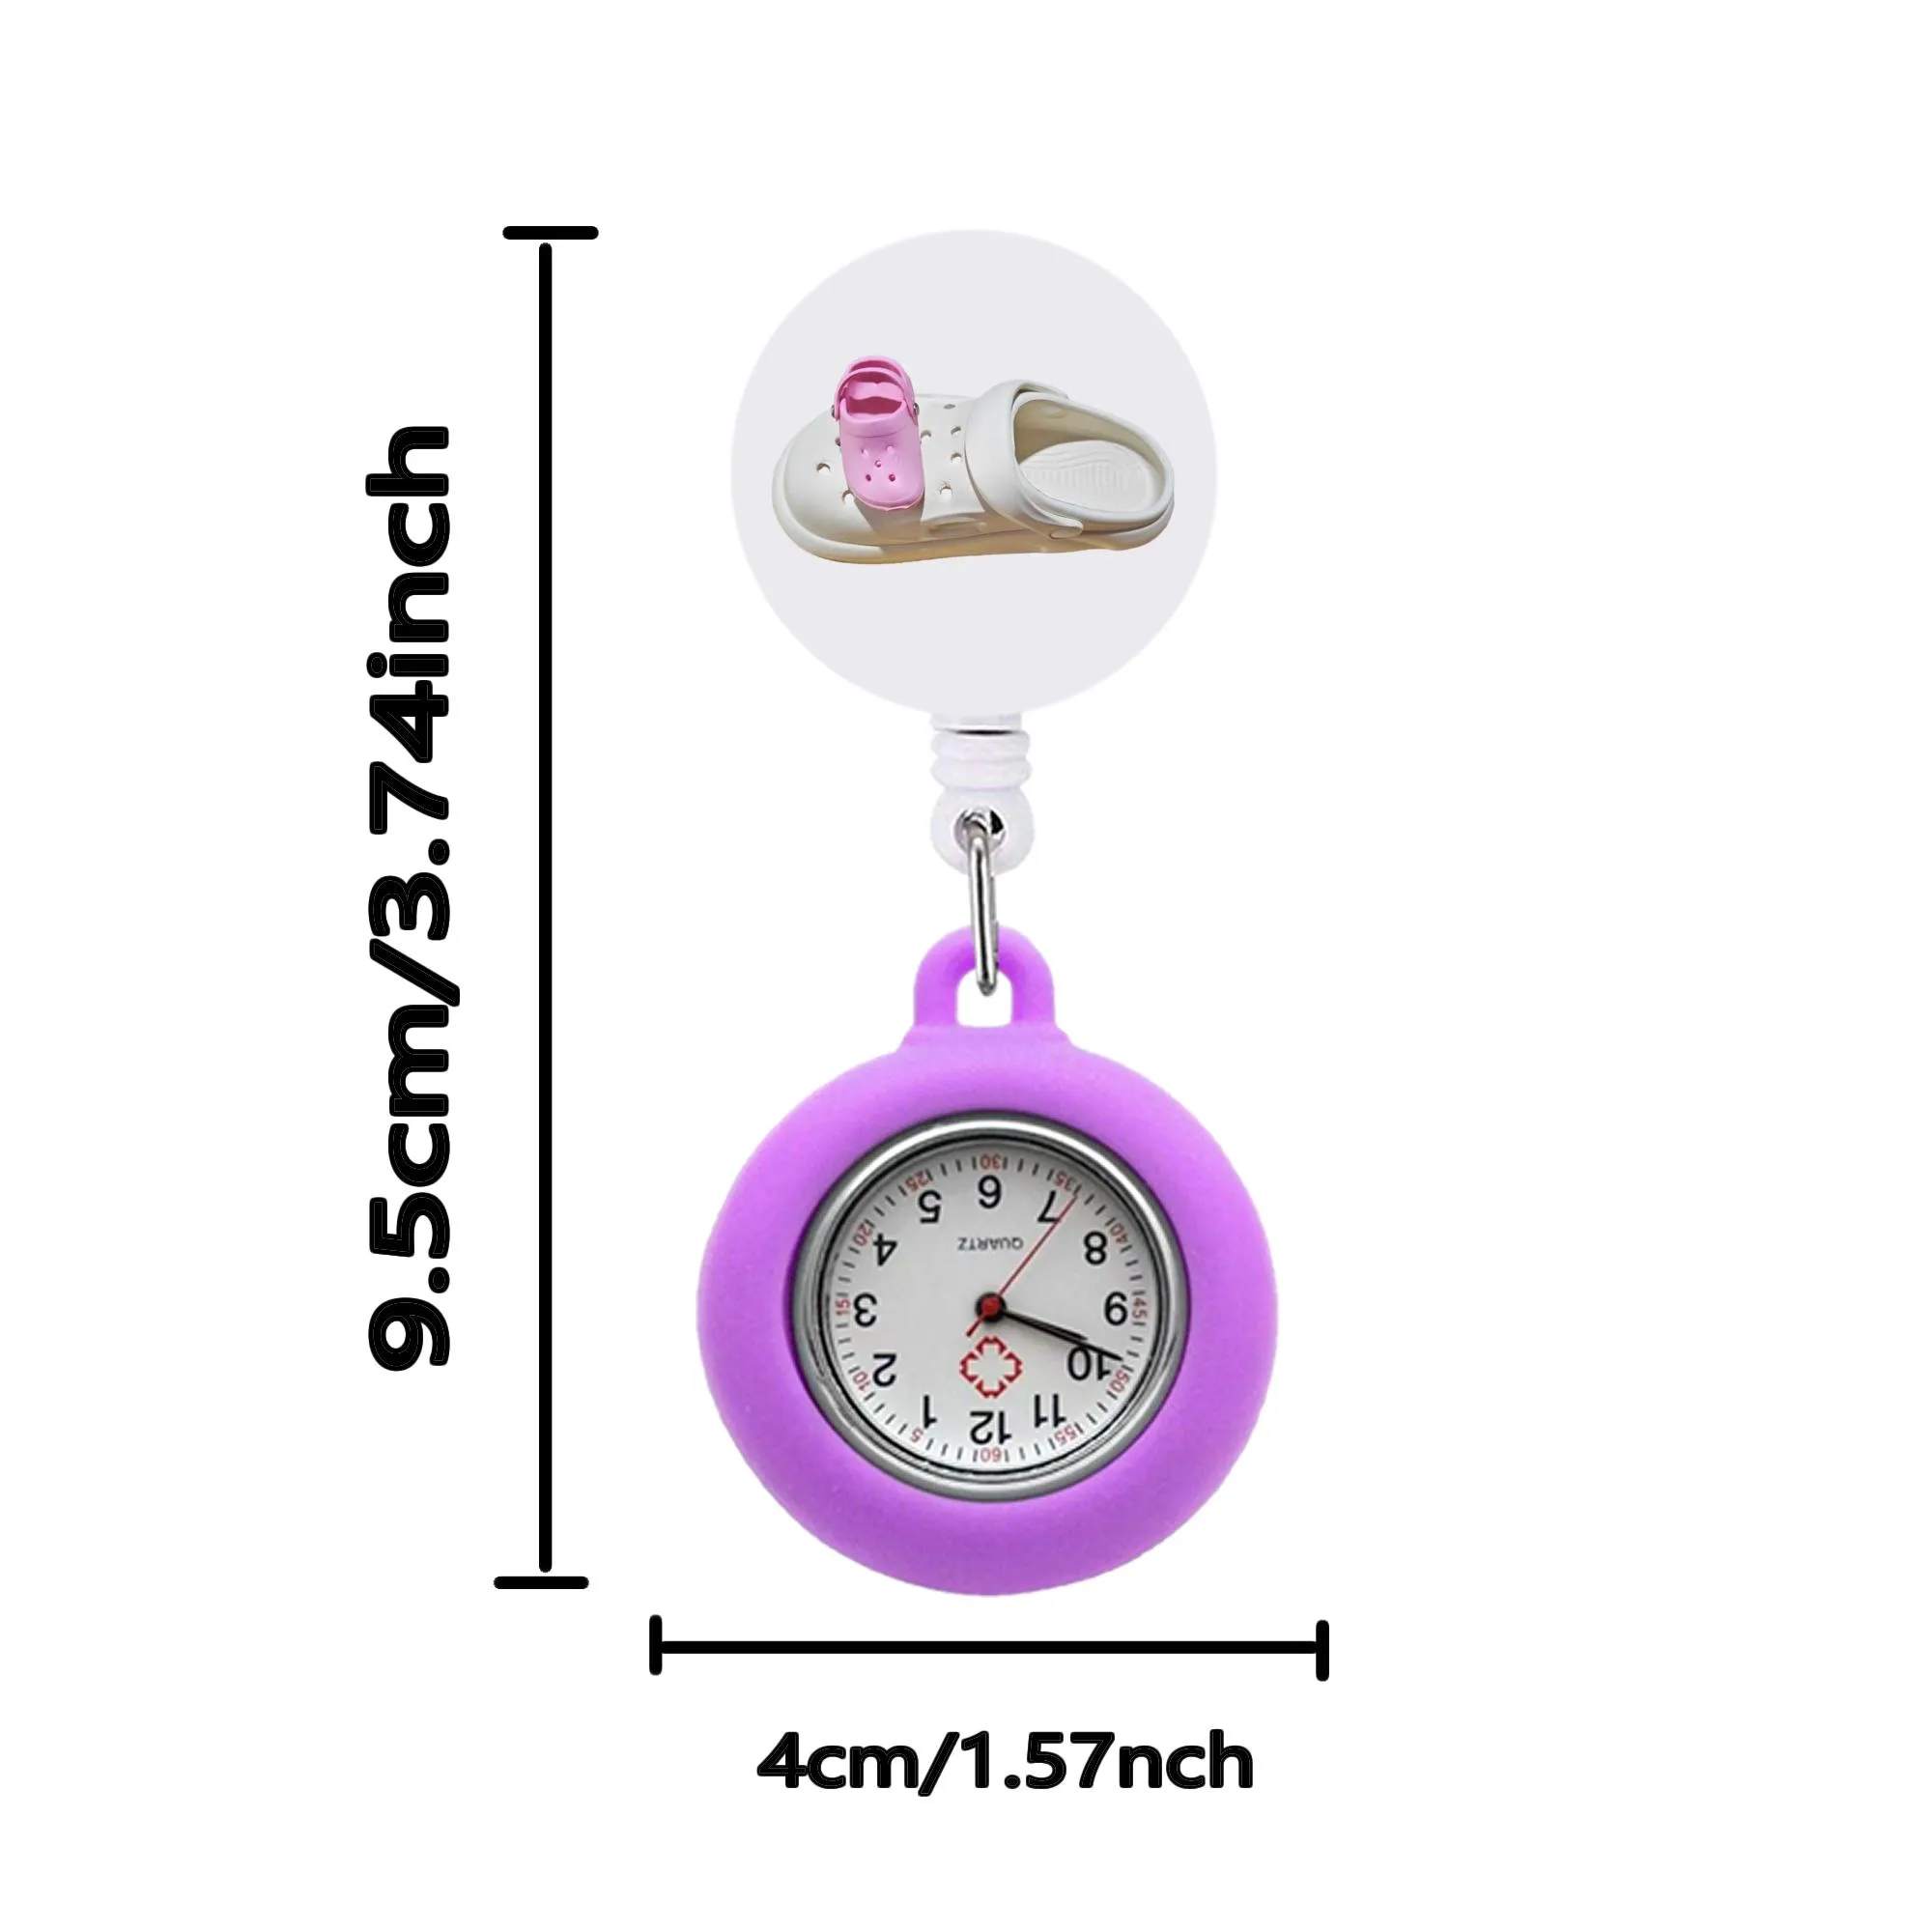 multi color perforated shoes clip pocket watches alligator medical hang clock gift brooch fob on watch easy to read nurse badge accessories